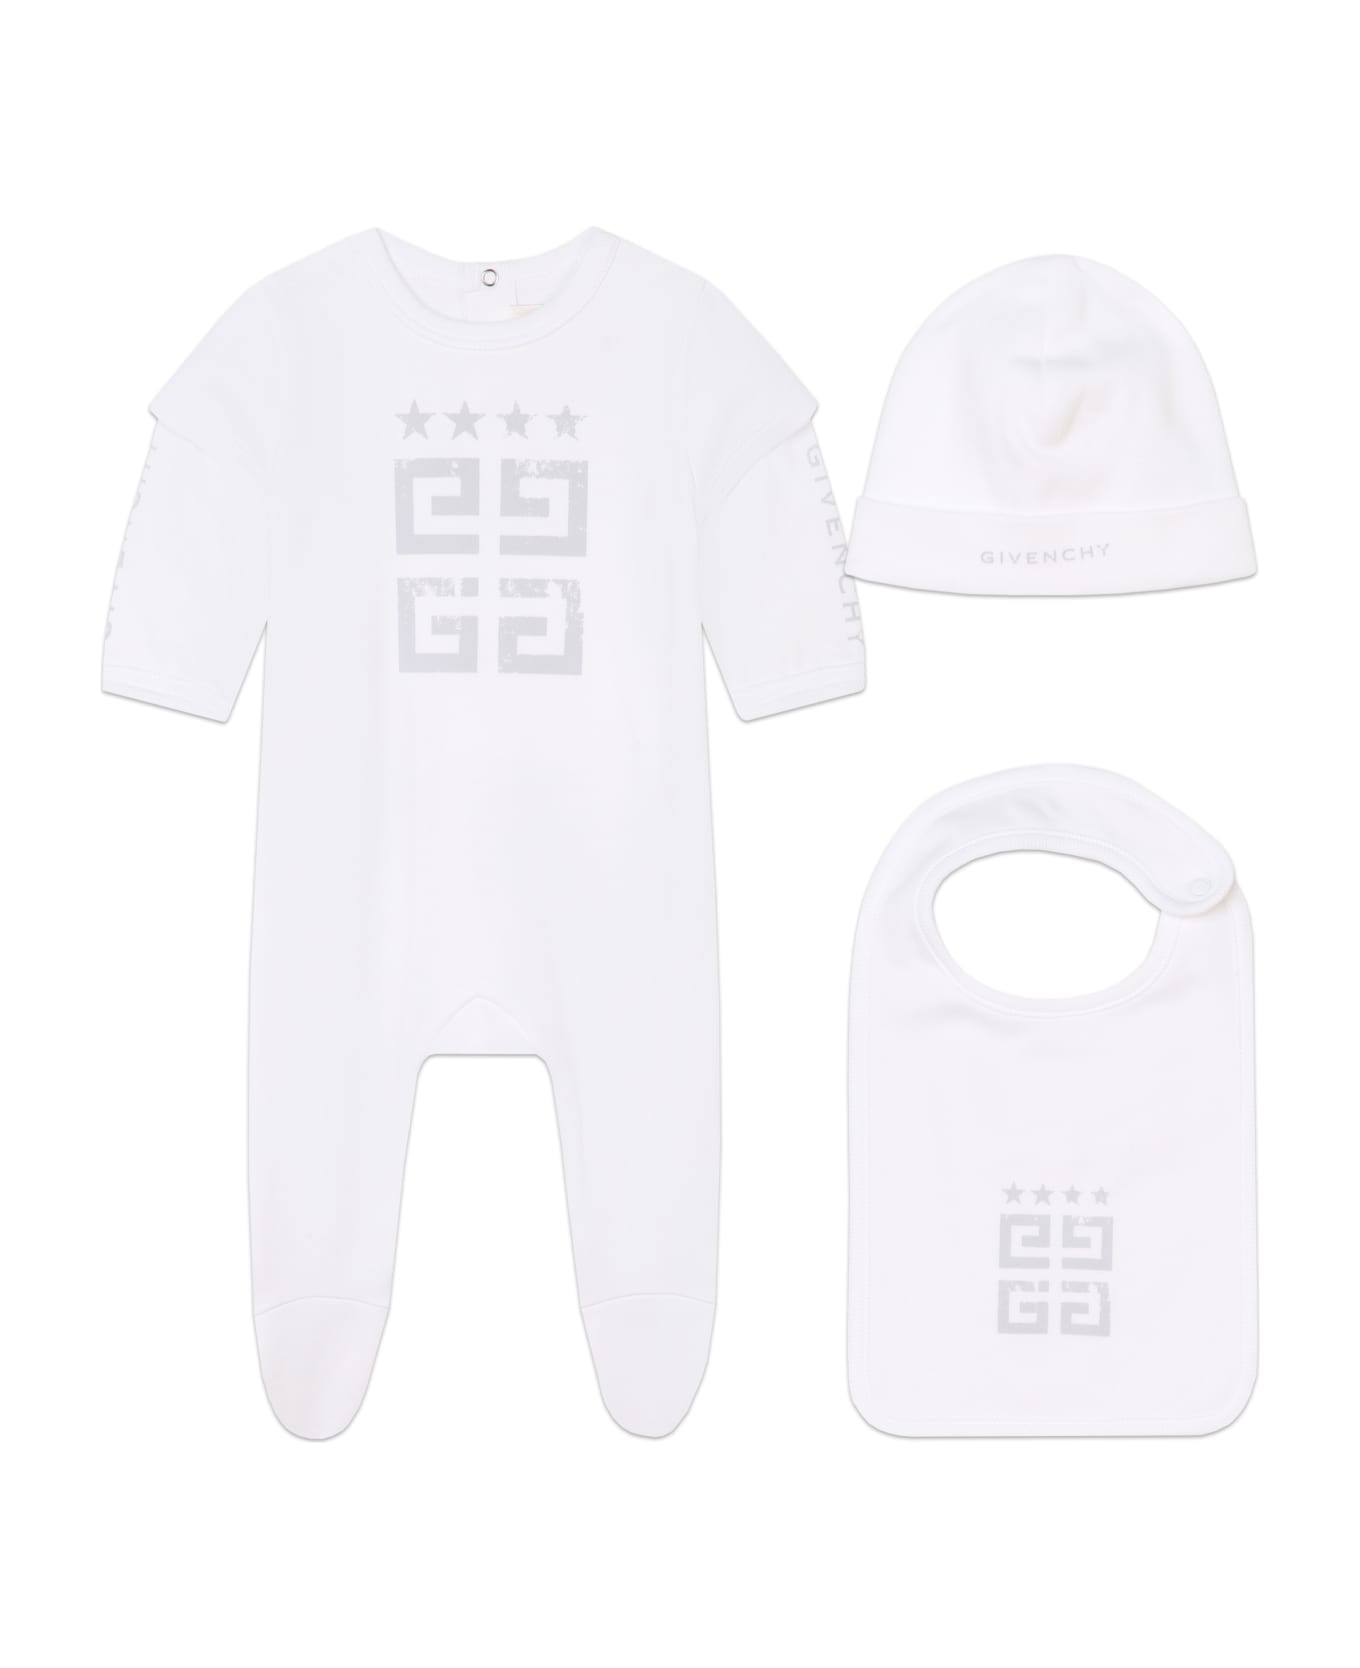 Givenchy 3-piece Baby Set With 4g Print - White